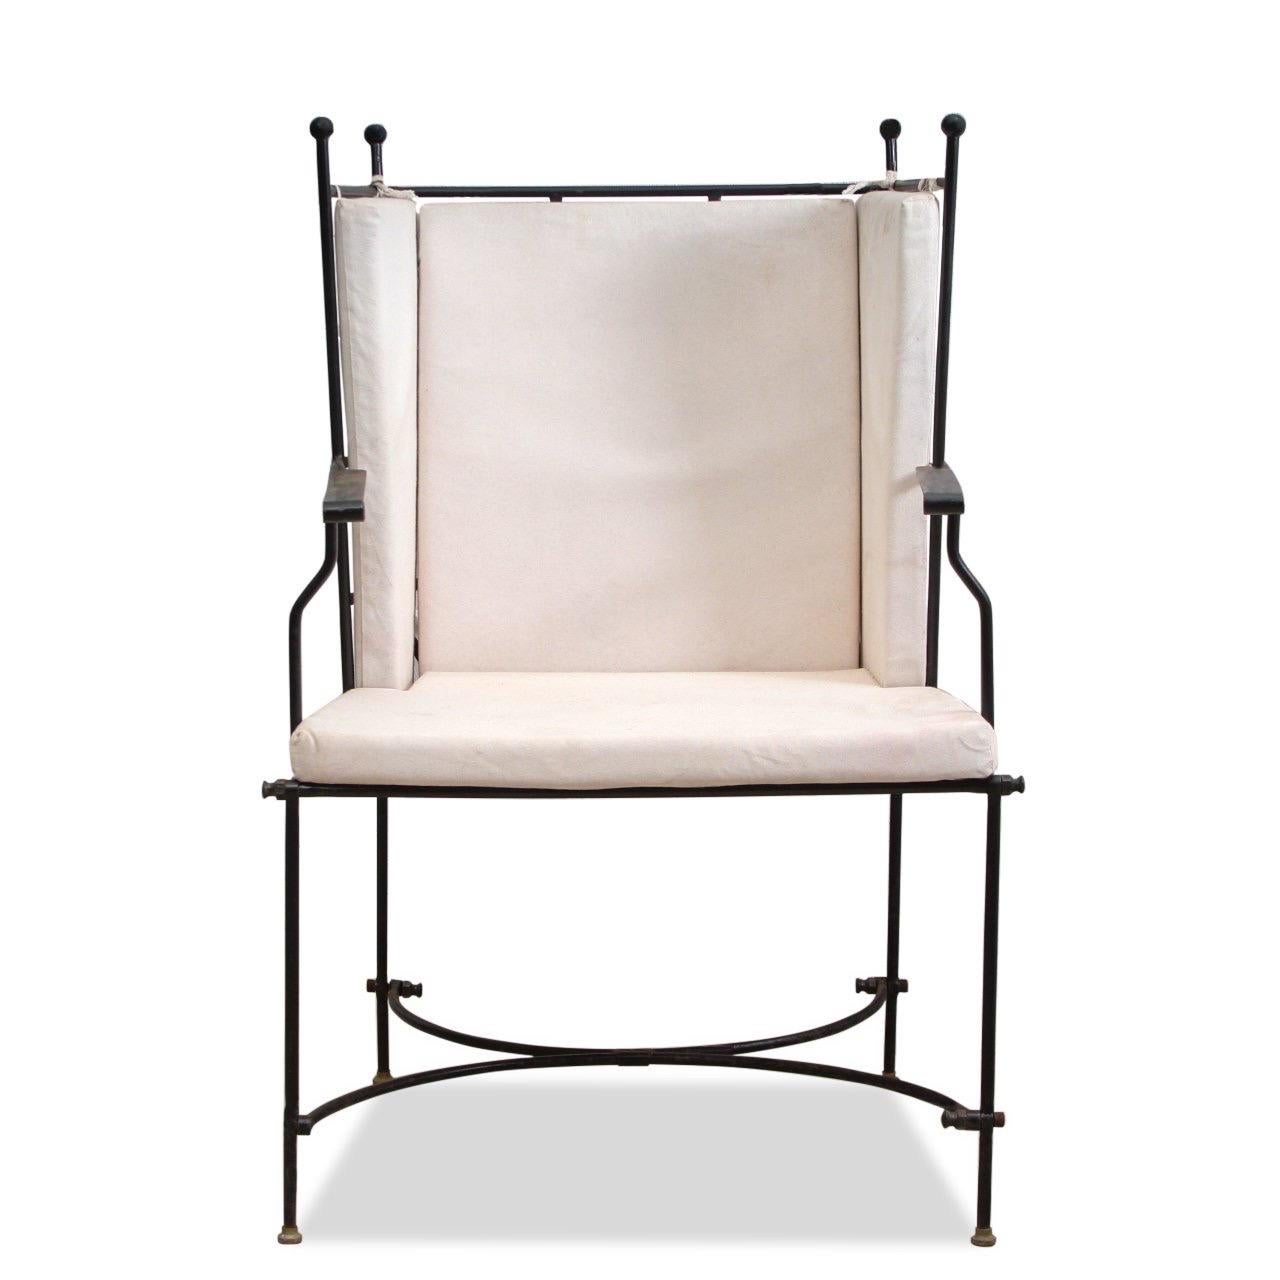 Set of four (4) indoor/outdoor armchairs in the style of Janus et Cie.

Details:
Black wrought iron metal frame.
Upholstery is made of high quality, high performance linen in white.

Dimensions:
22” W
23” D
38” H
18.5” Seat H
27.5” Arm H